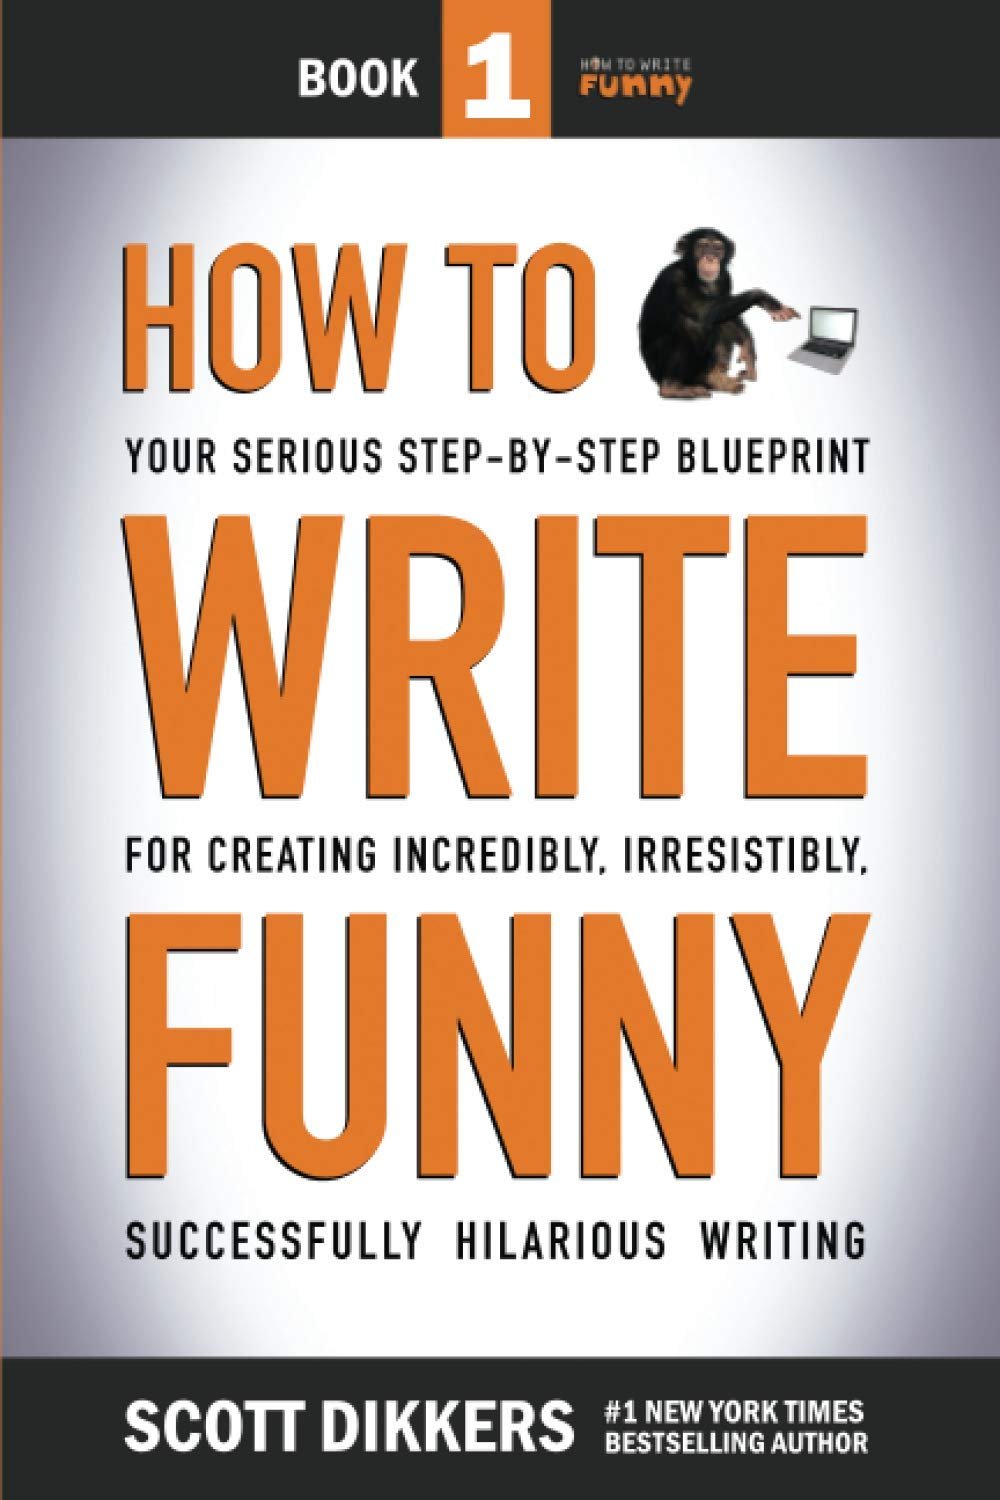 How To Write Funny by Scott Dikkers